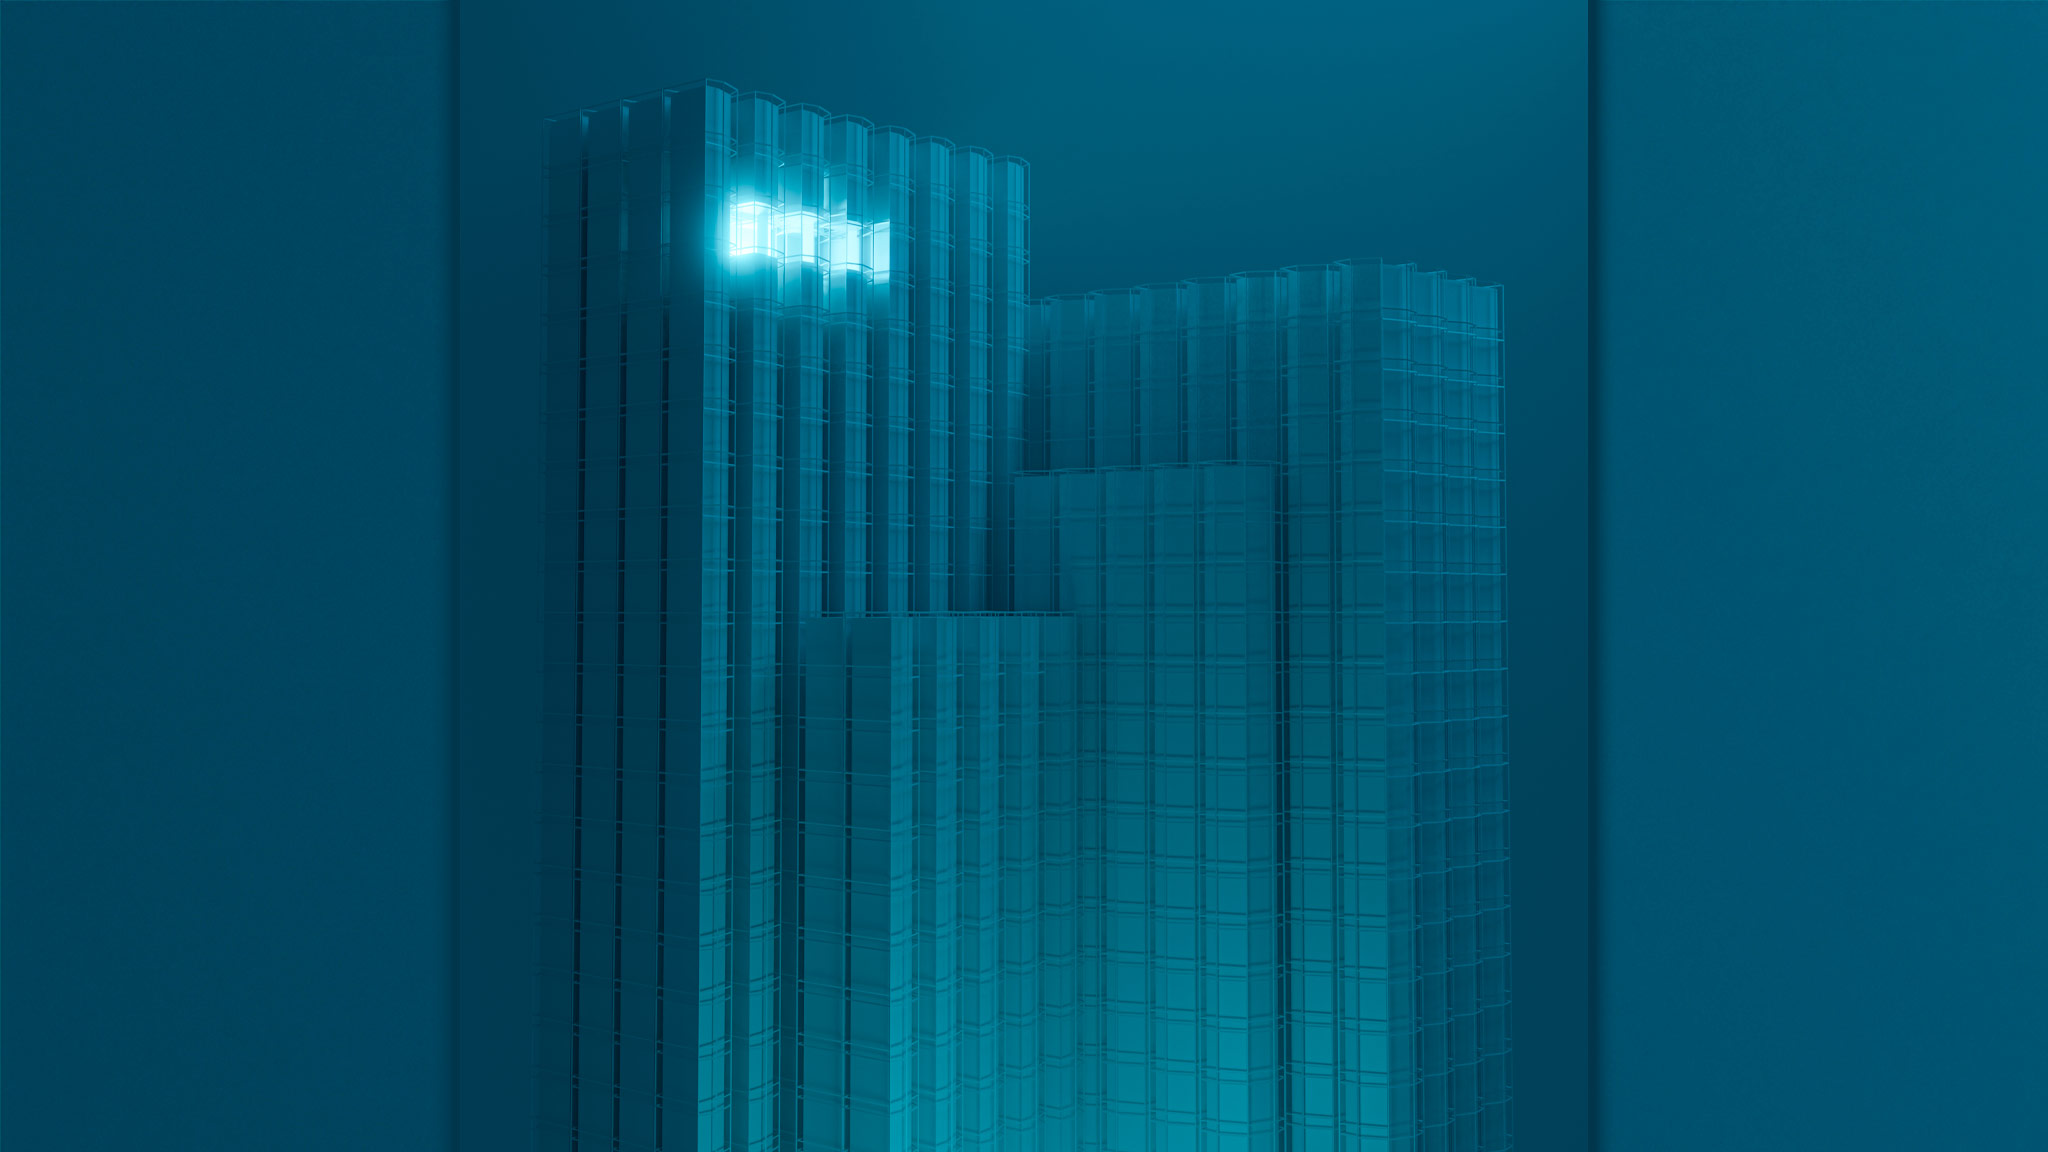 Moody Illustration Of Skyscrapers At Night With Only A Single Row Of Windows Lit At The Top Level